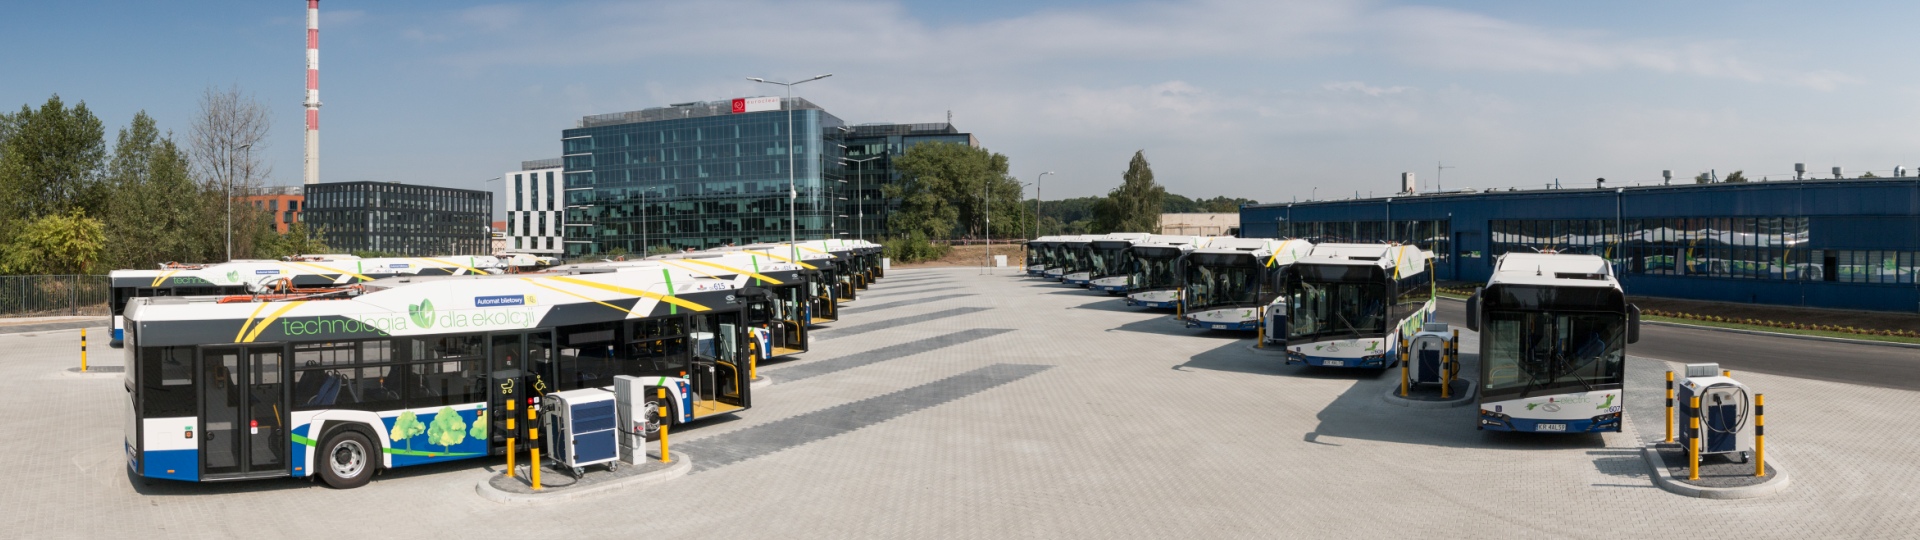 MPK Cracow with another 20 electric Solaris buses